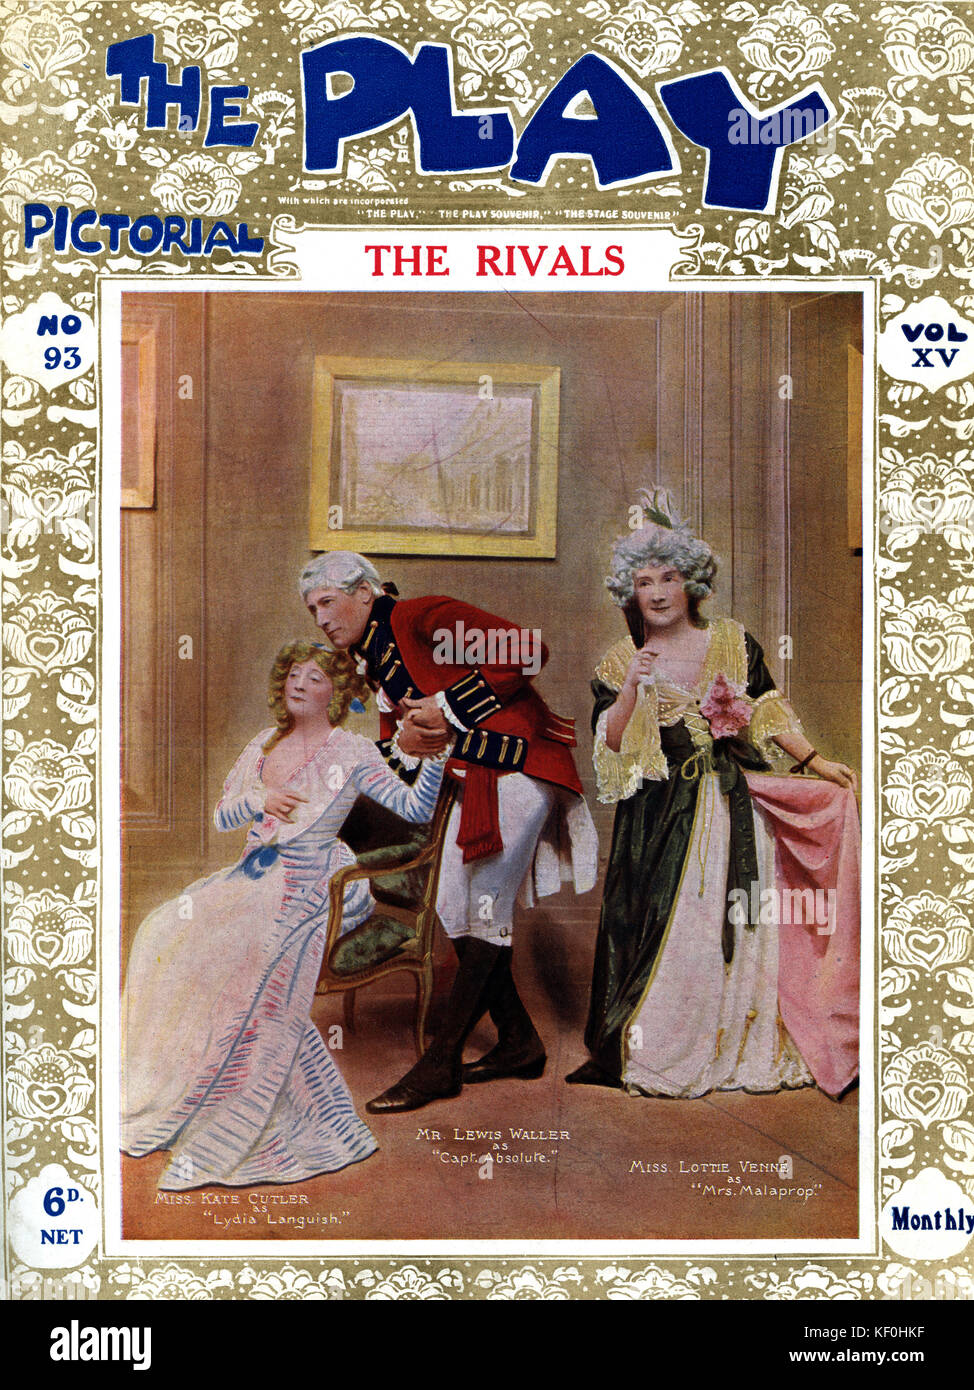 'The Rivals' by Richard Brinsley Sheridan, with Kate Cutler as Lydia Languish (14 August 1864 – 14 May 1955), Lewis Waller as Captain Absolute (3 November 1860 - 1 November 1915) and Lottie Venne as Mrs Malaprop (28 May 1852 – 16 July 1928). London theatre. Cover of Play Pictorial, 1910. Stock Photo